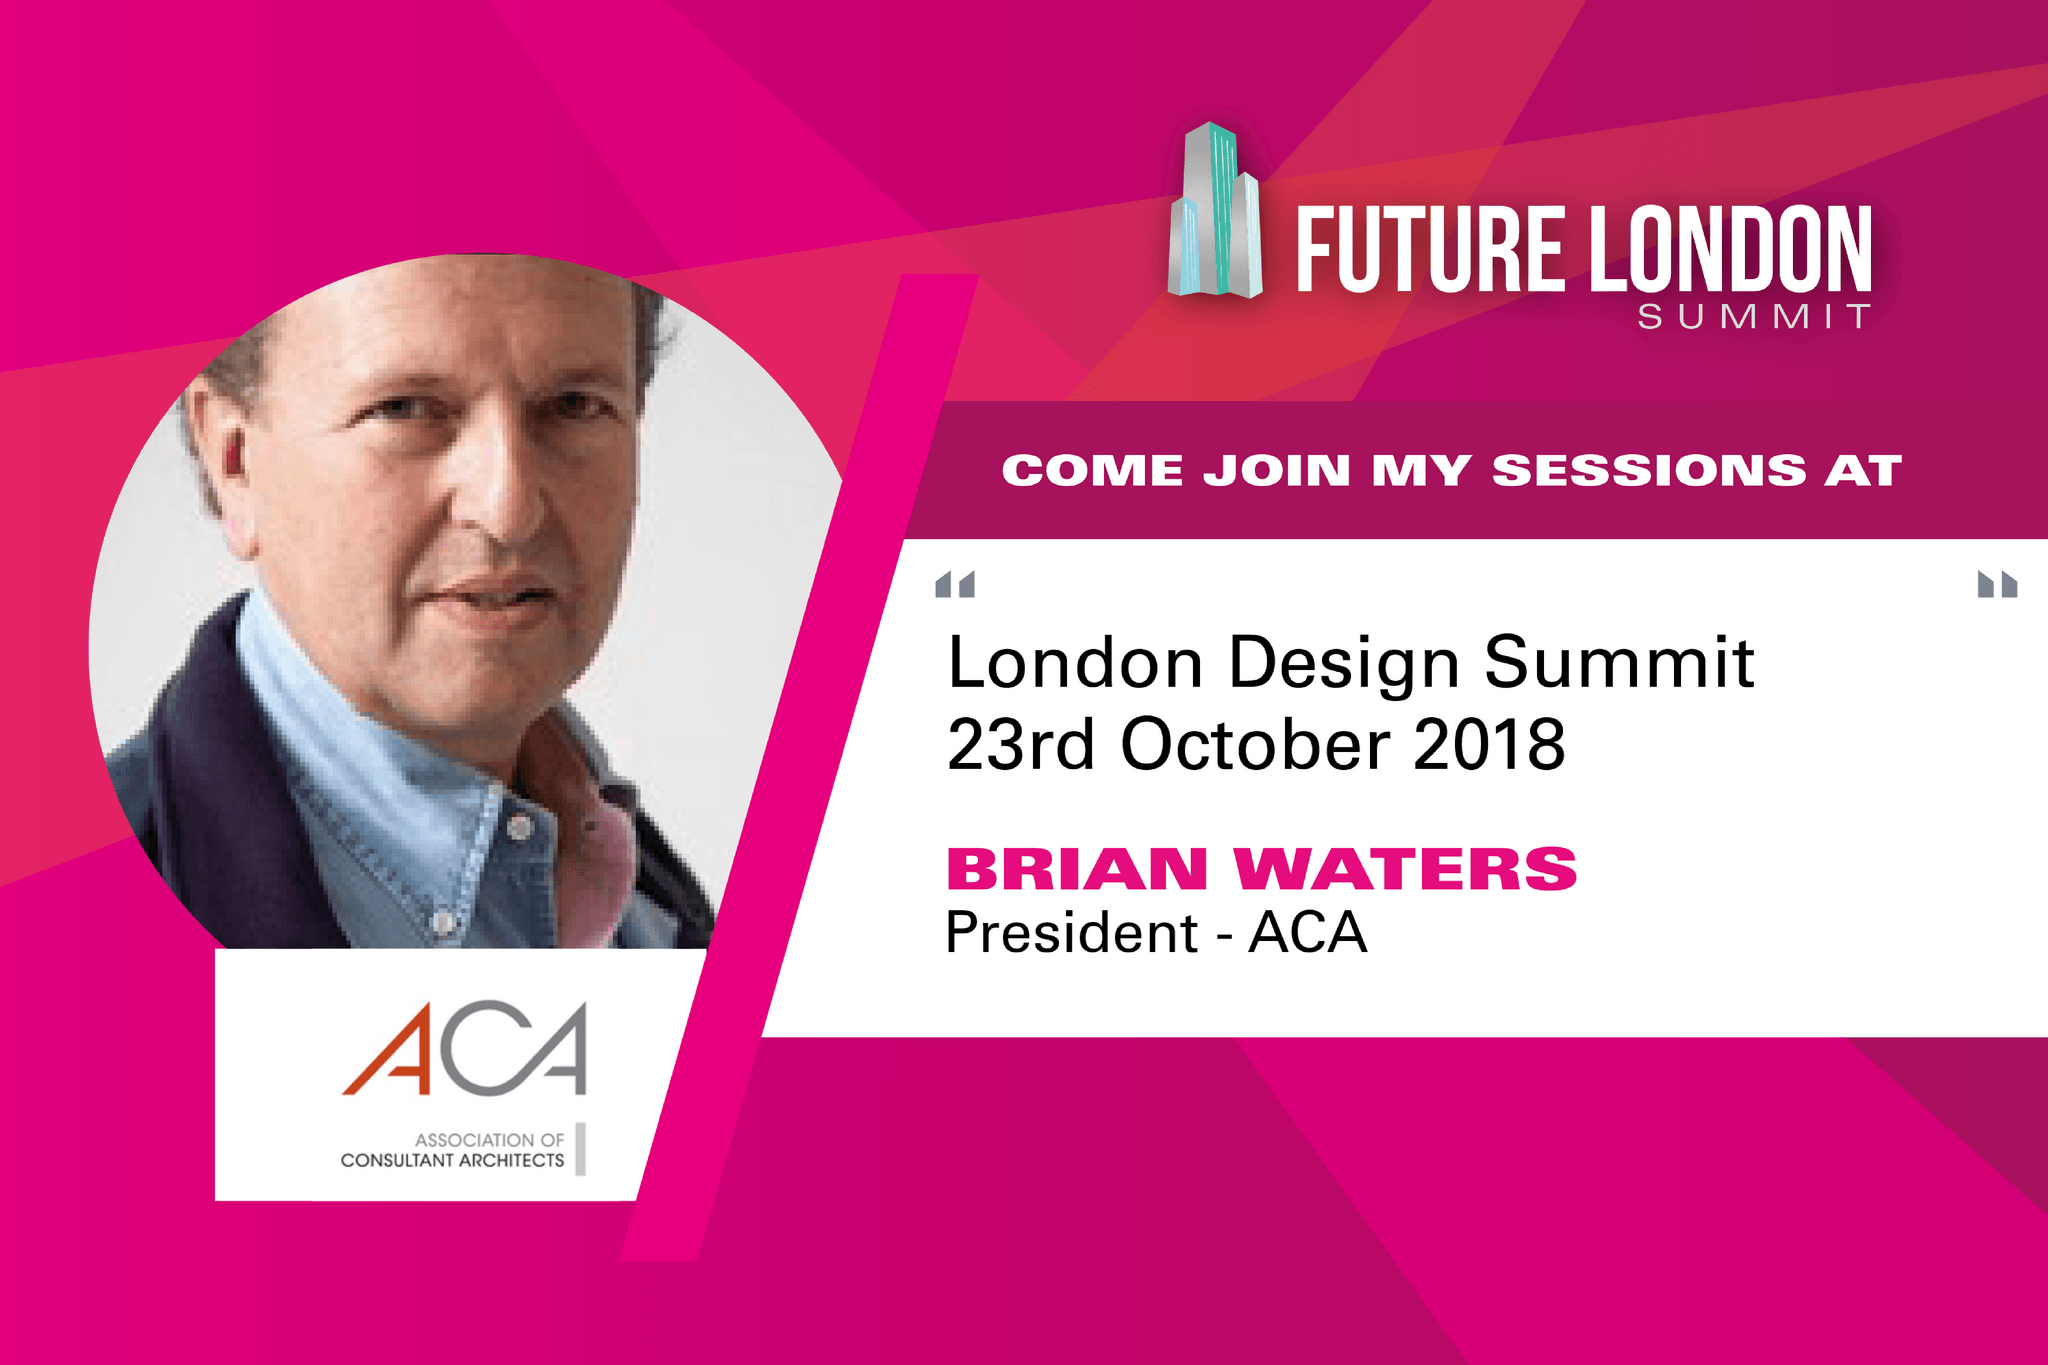 THE ACA AT LONDON BUILD 2018 – AN INTERVIEW WITH THE PRESIDENT, BRIAN WATERS